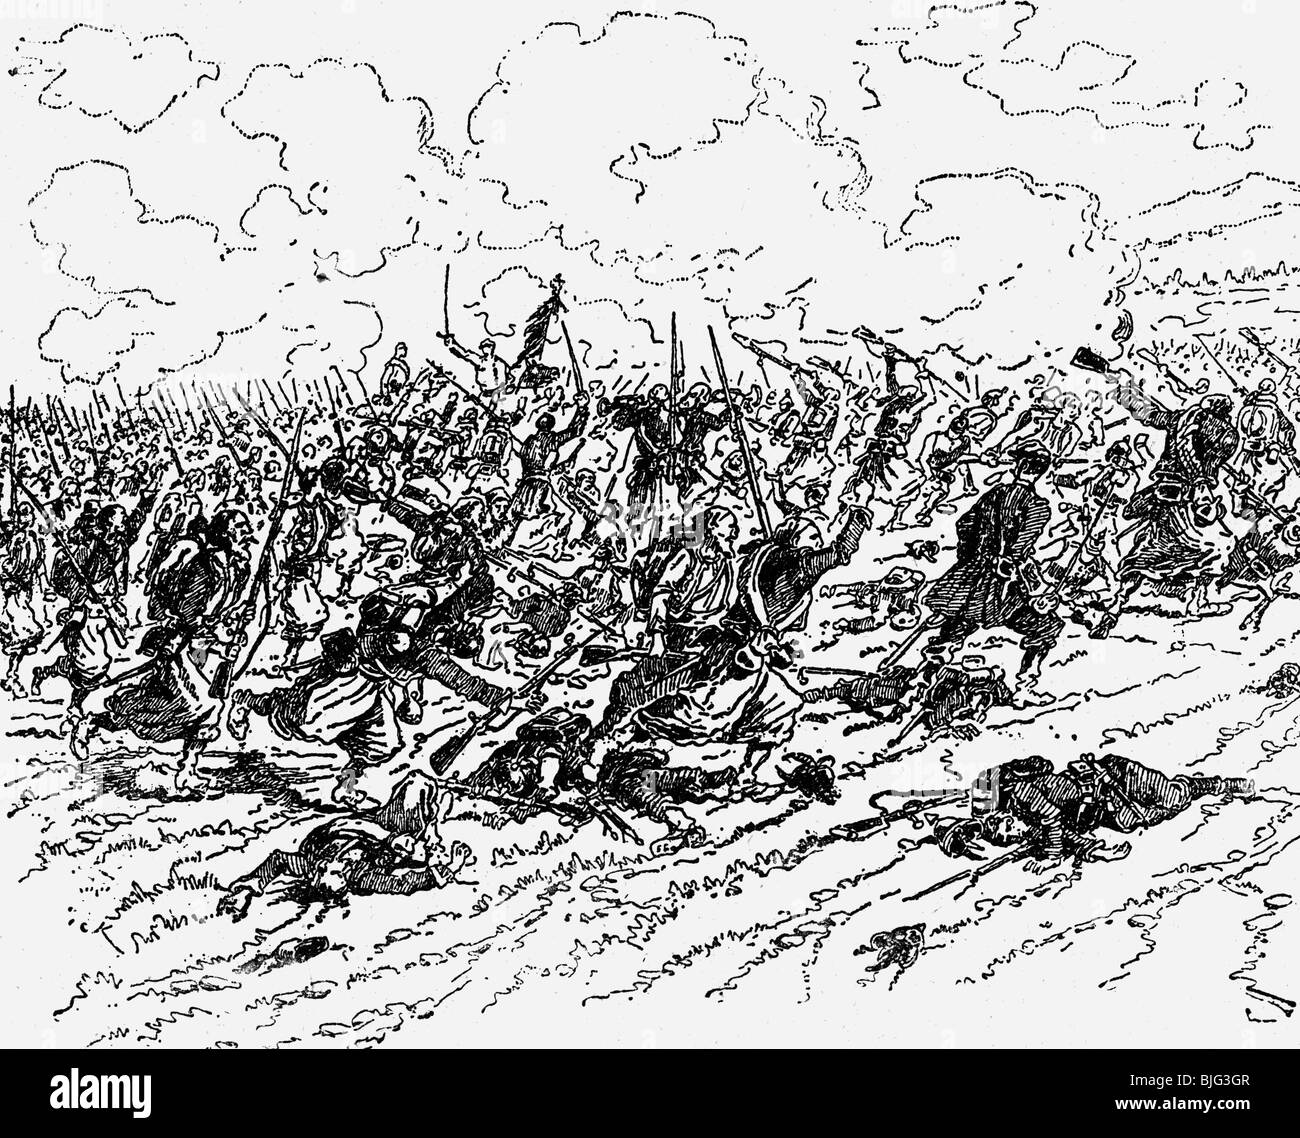 events, Franco-Prussia War 1870 - 1871, Battle of Woerth, 6.8.1870, French zouaves charging, wood engraving, 19th century, Franco - Prussian, France, Alsace, Froeschwiller, French Army of the Rhine, soldiers, colonial troops, infantry, historic, historical, people, Stock Photo